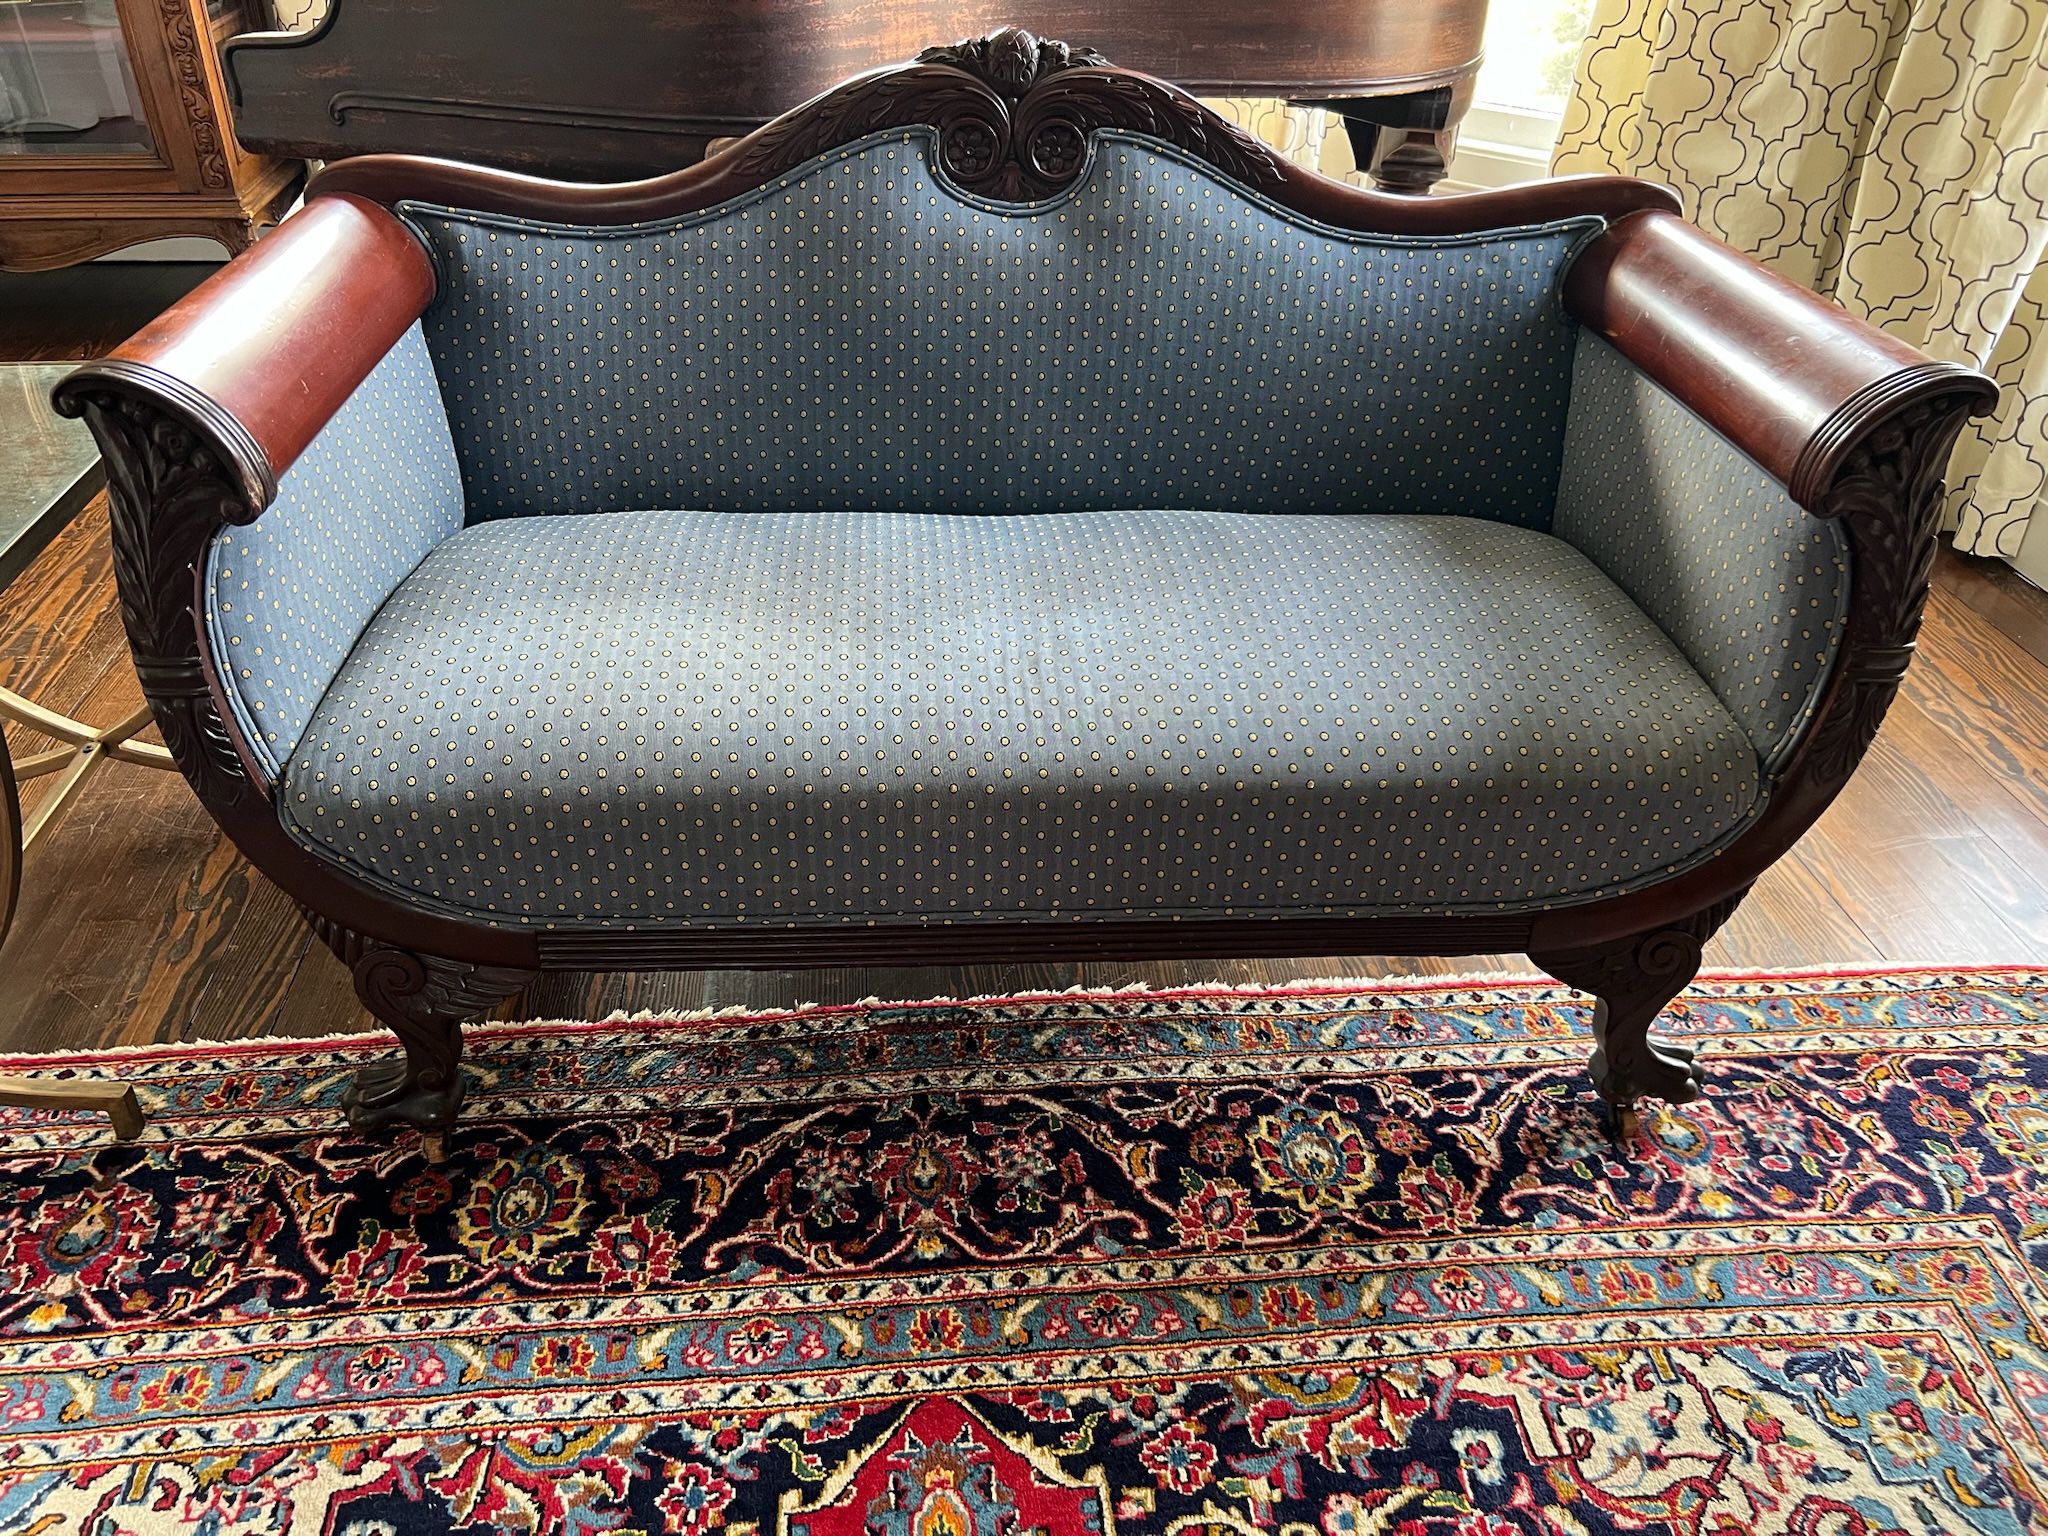 Gorgeous Wood and Upholstered Antique Settee in Great Condition 56.5”w x 34.5”h x 24”d x 16”sh x 22”sd Smoke free household